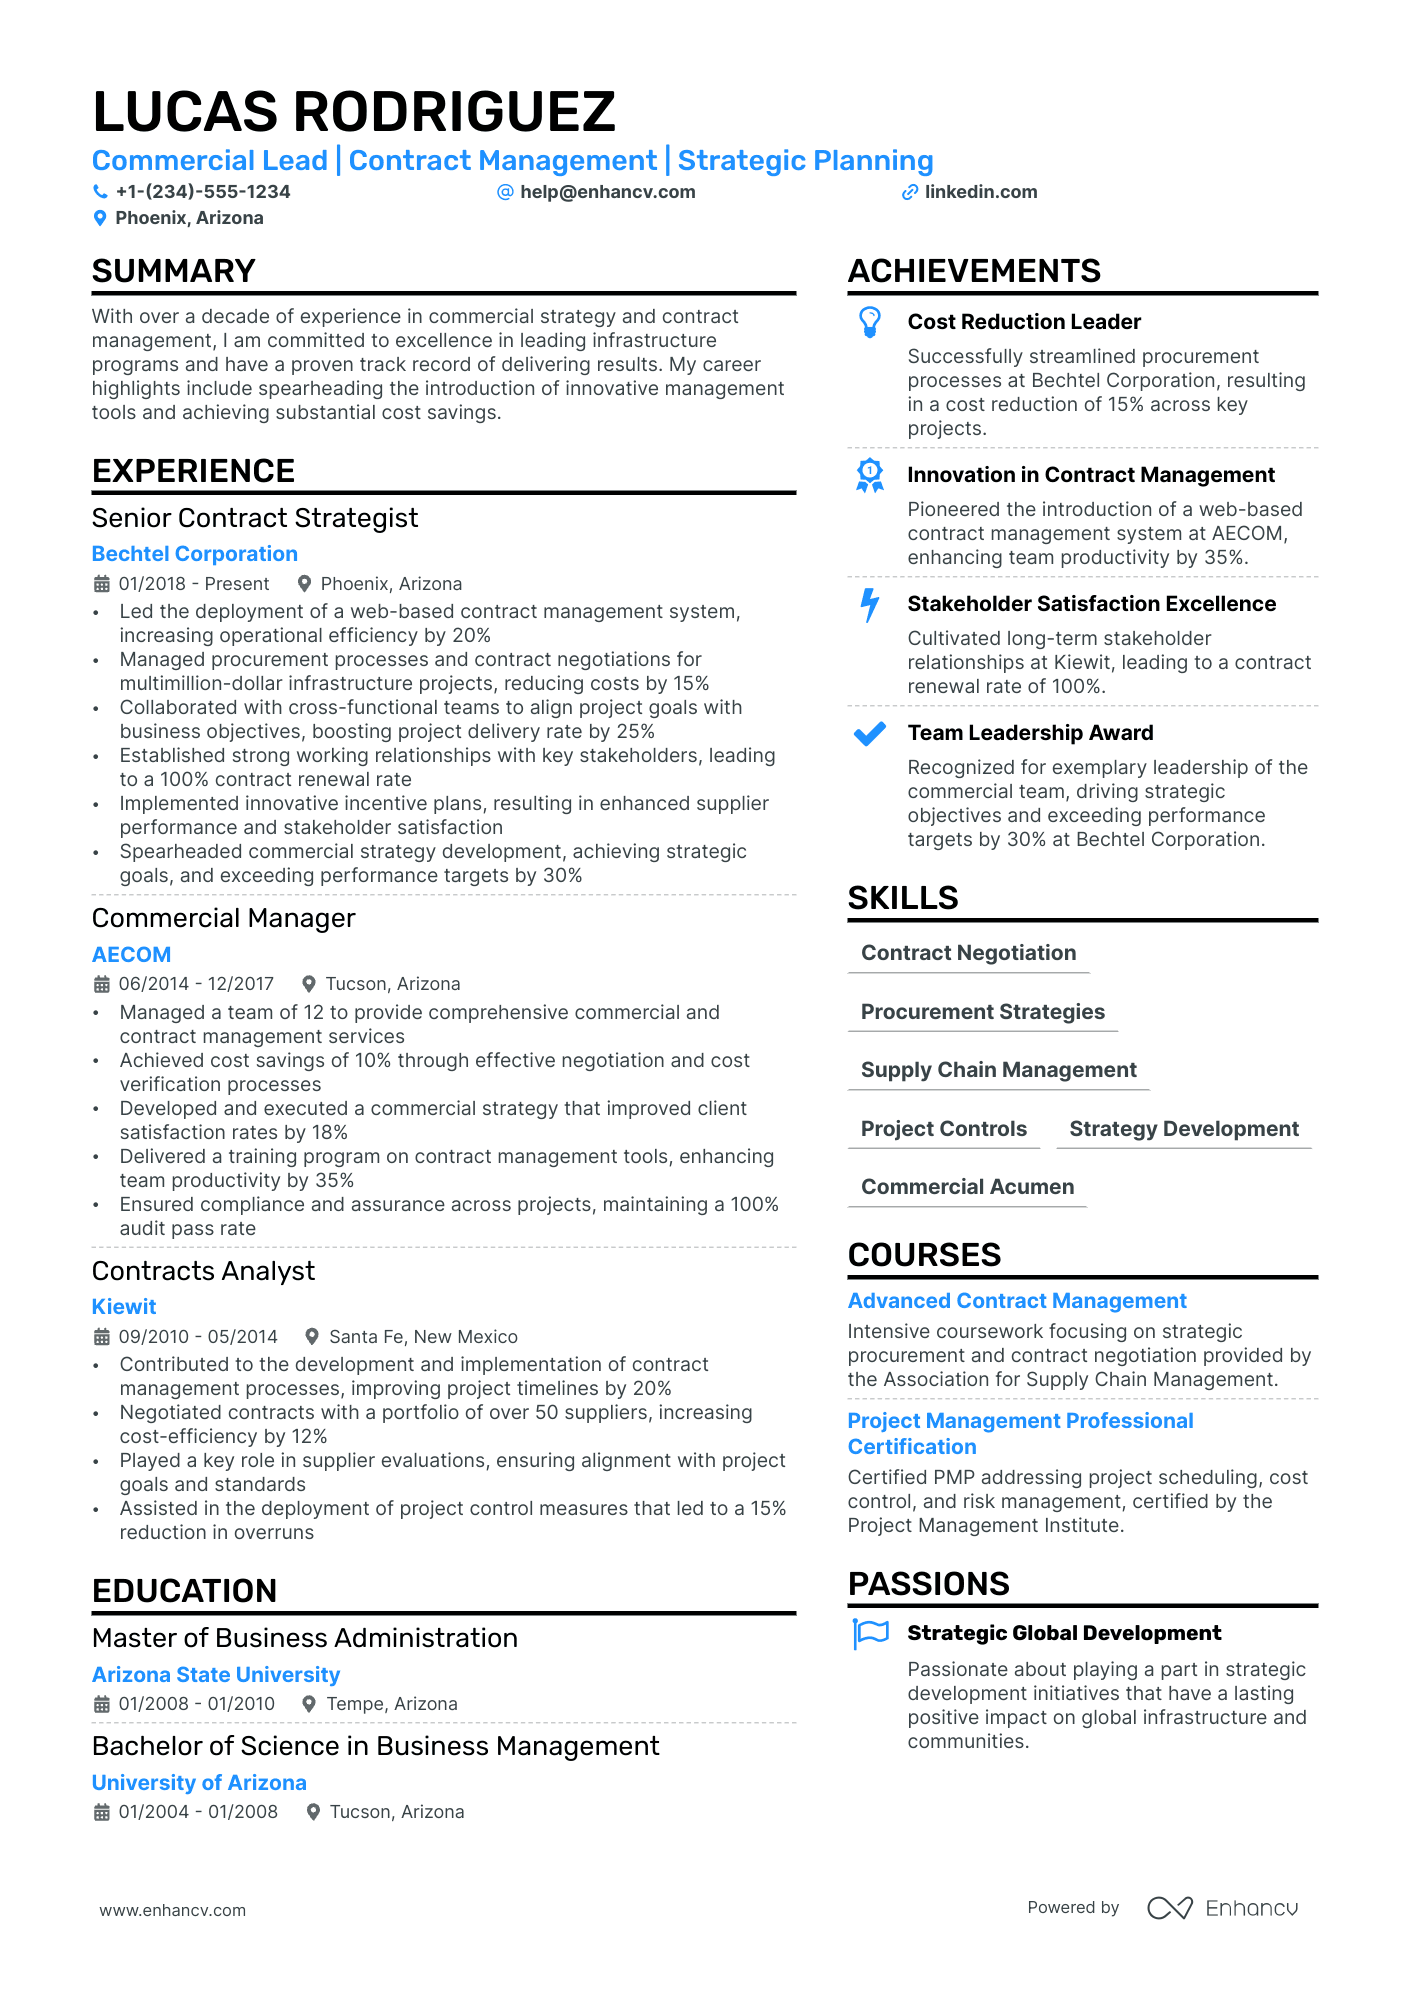 Commercial Manager resume example